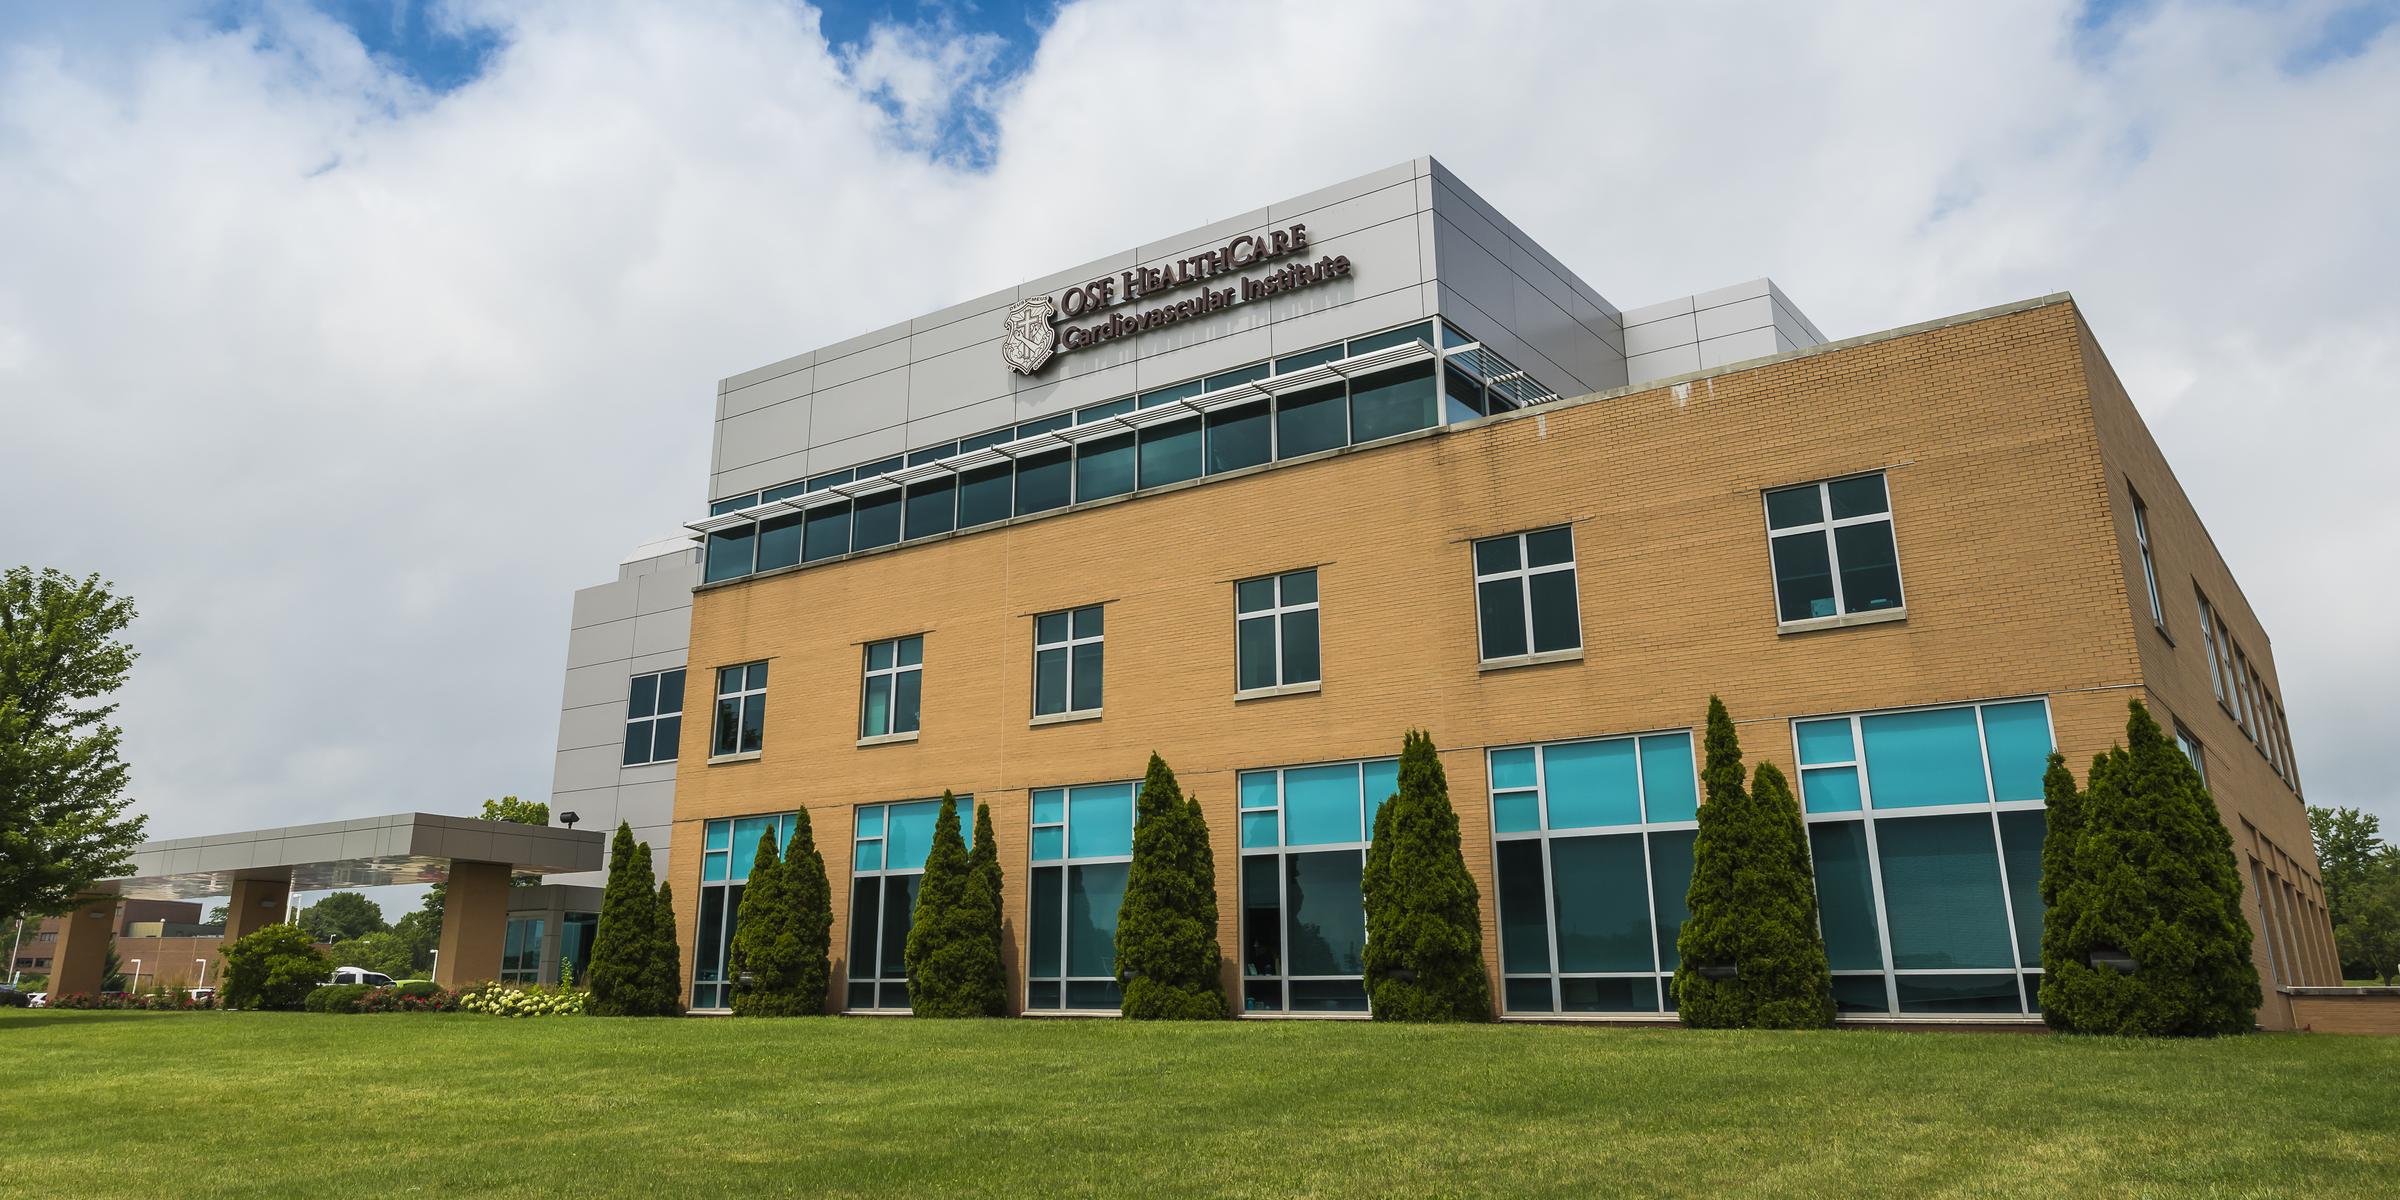 OSF Cardiovascular Institute, 5405 N. Knoxville Avenue, Peoria, Illinois, 61614